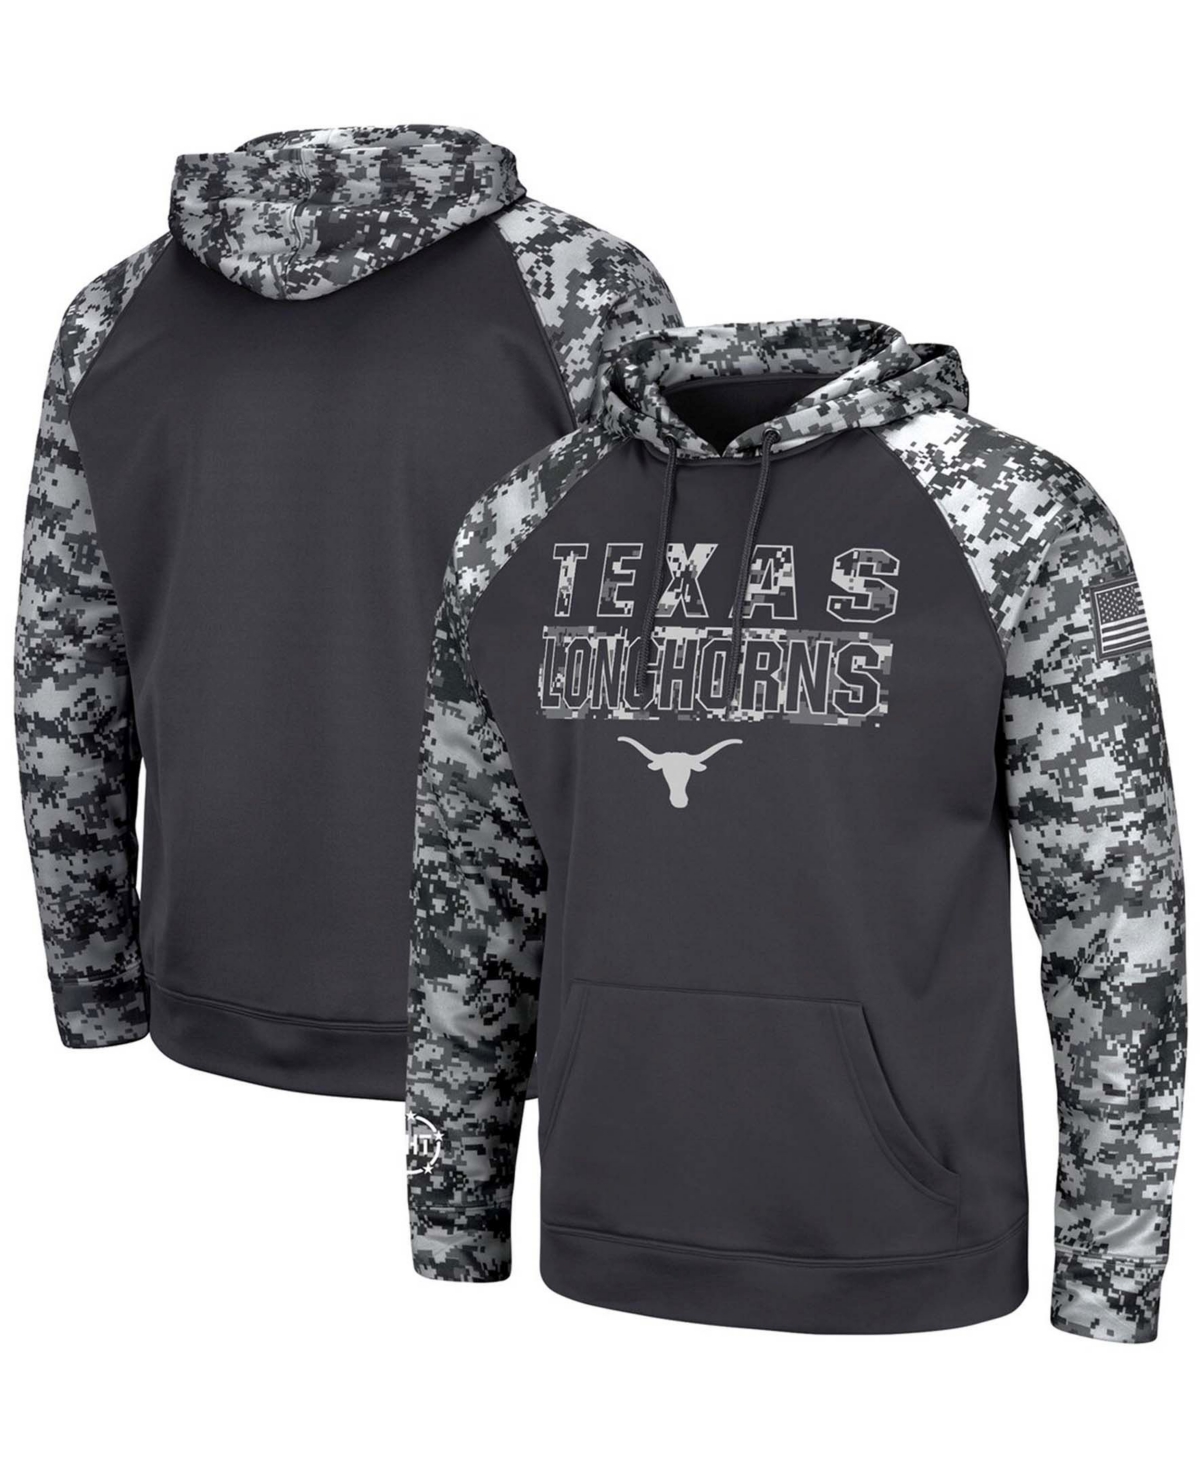 Men's Charcoal Texas Longhorns Oht Military-Inspired Appreciation Digital Camo Pullover Hoodie - Charcoal